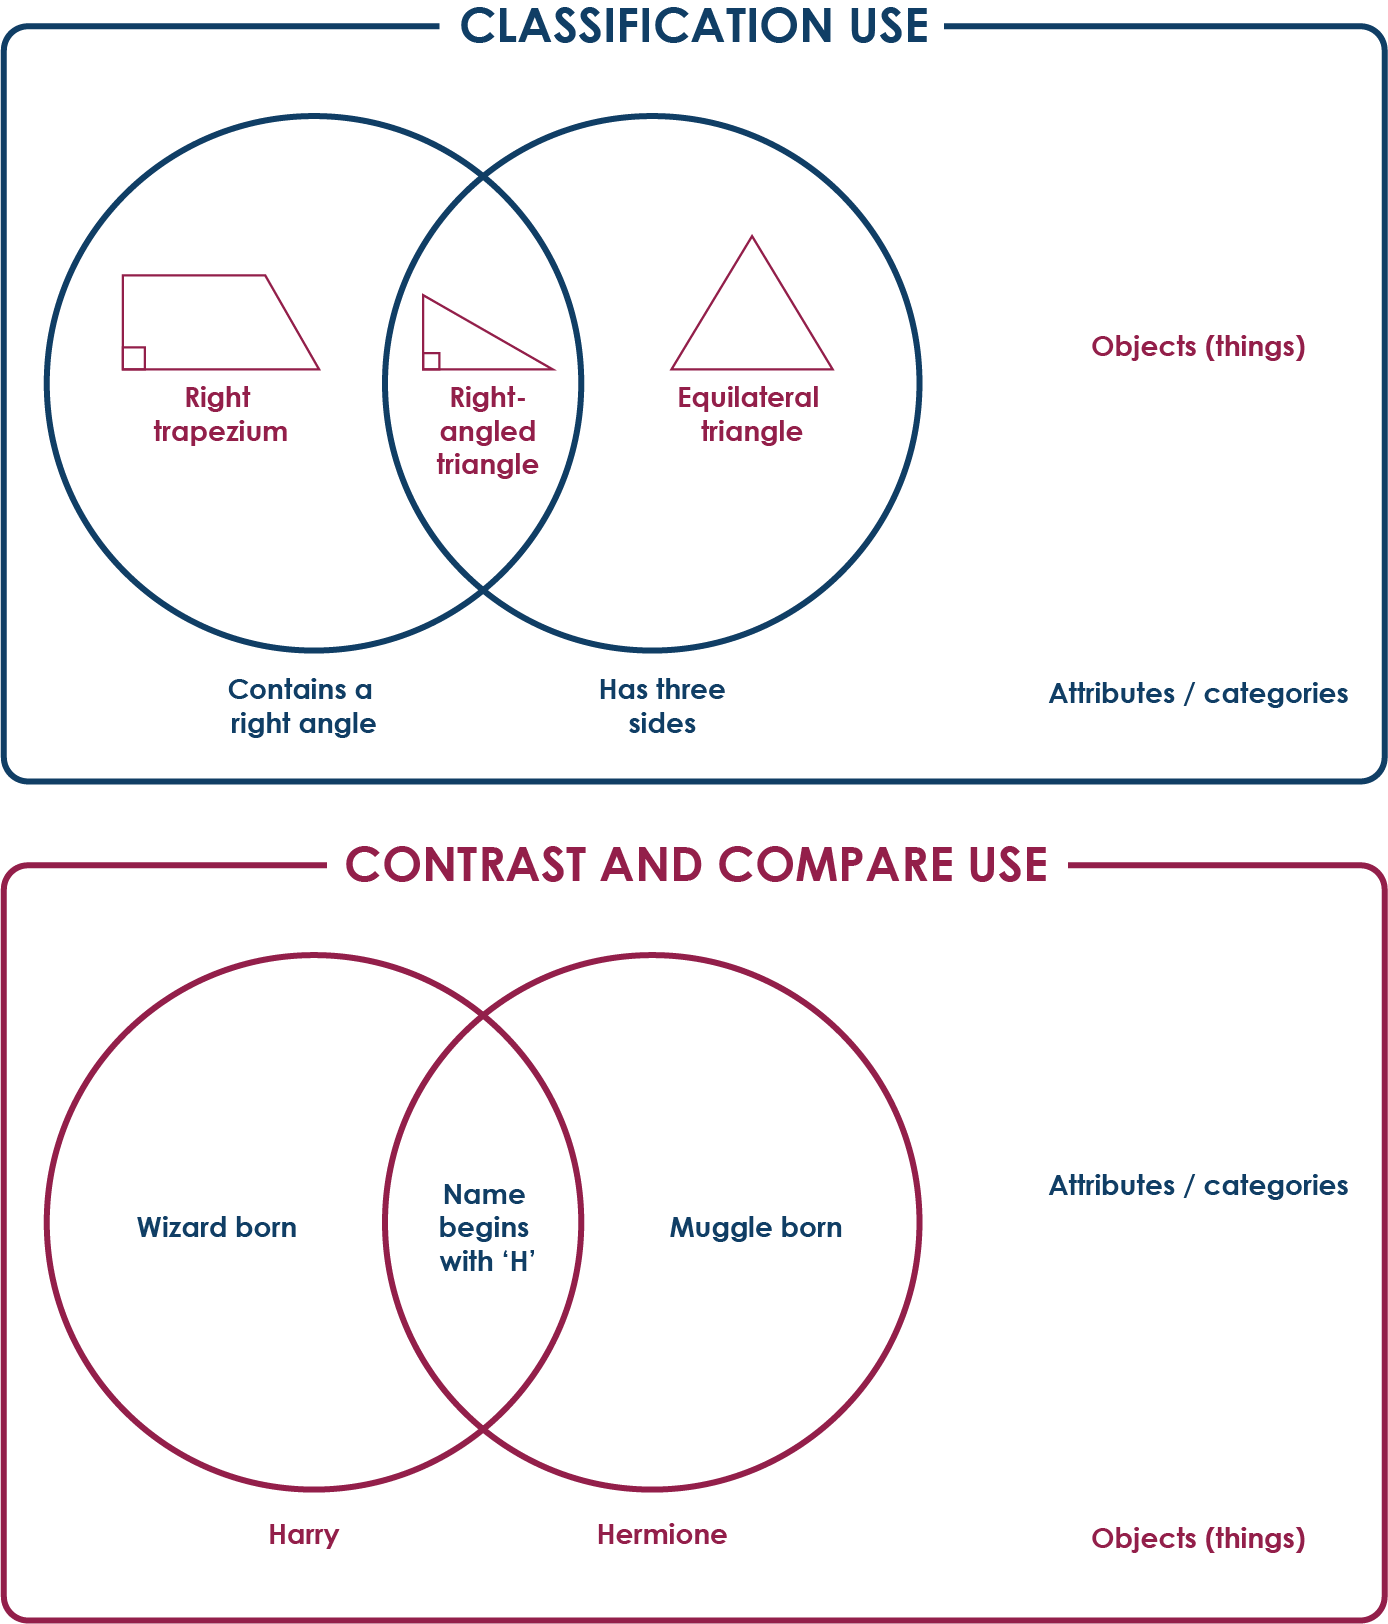 Venn diagram on Classification use against contrast and compare use